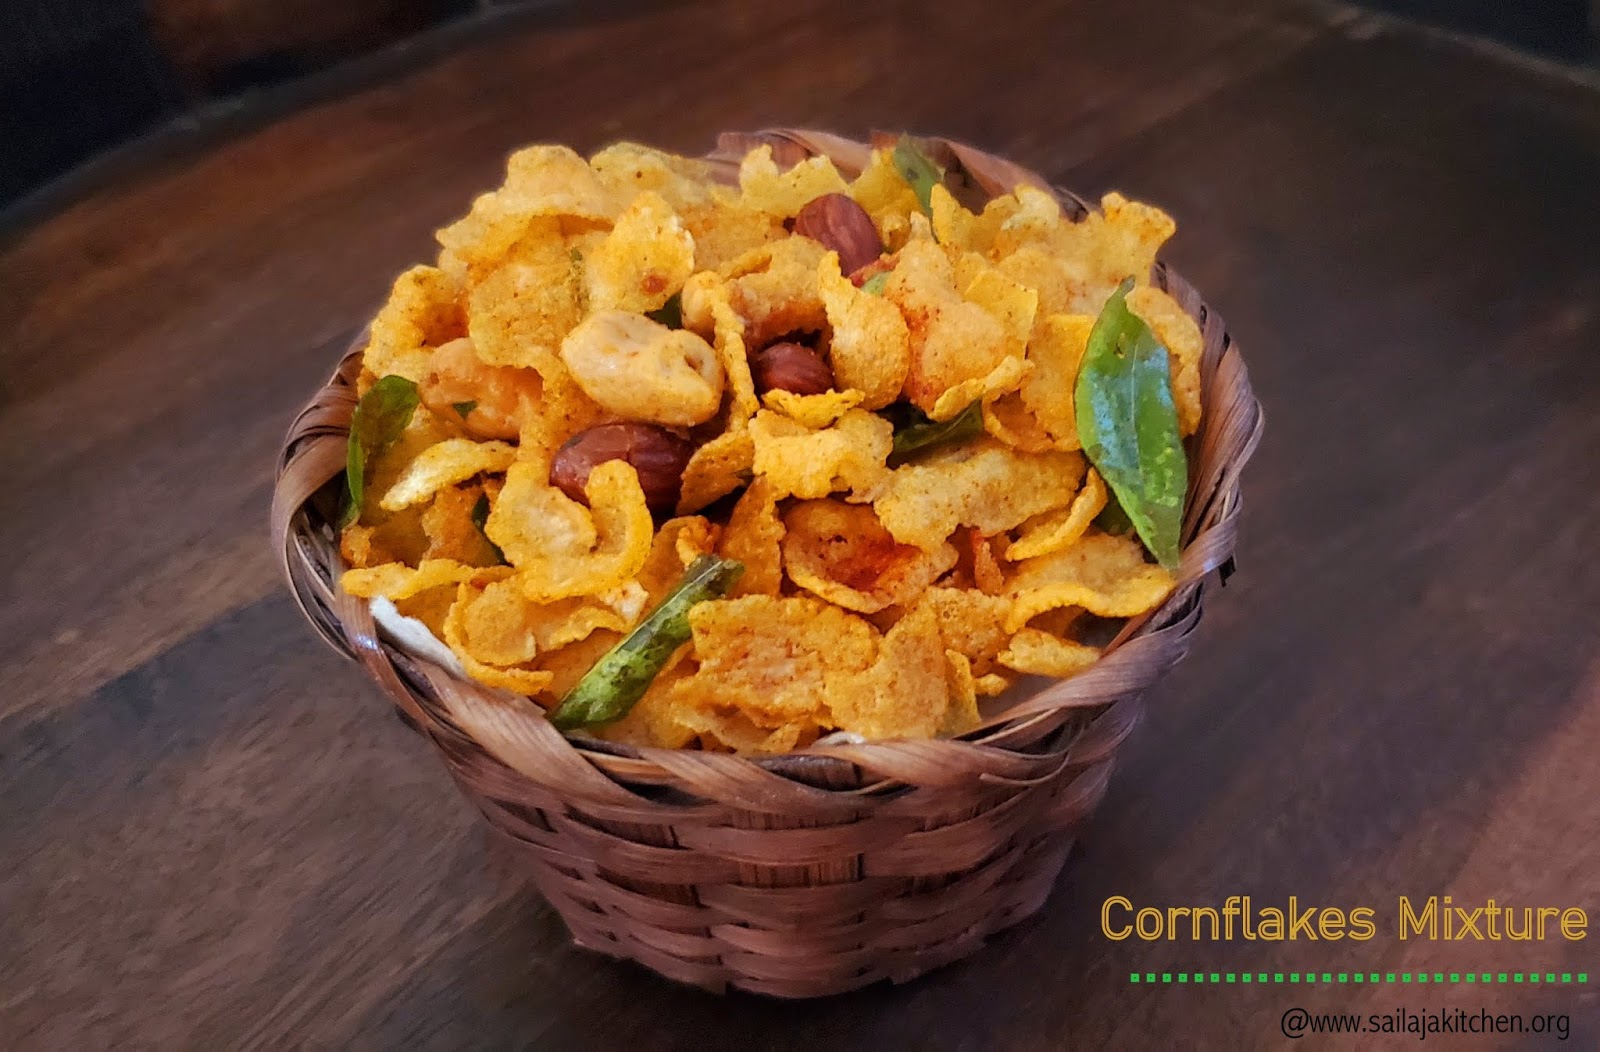 Sailaja Kitchen...A site for all food lovers!: Cornflakes Mixture ...